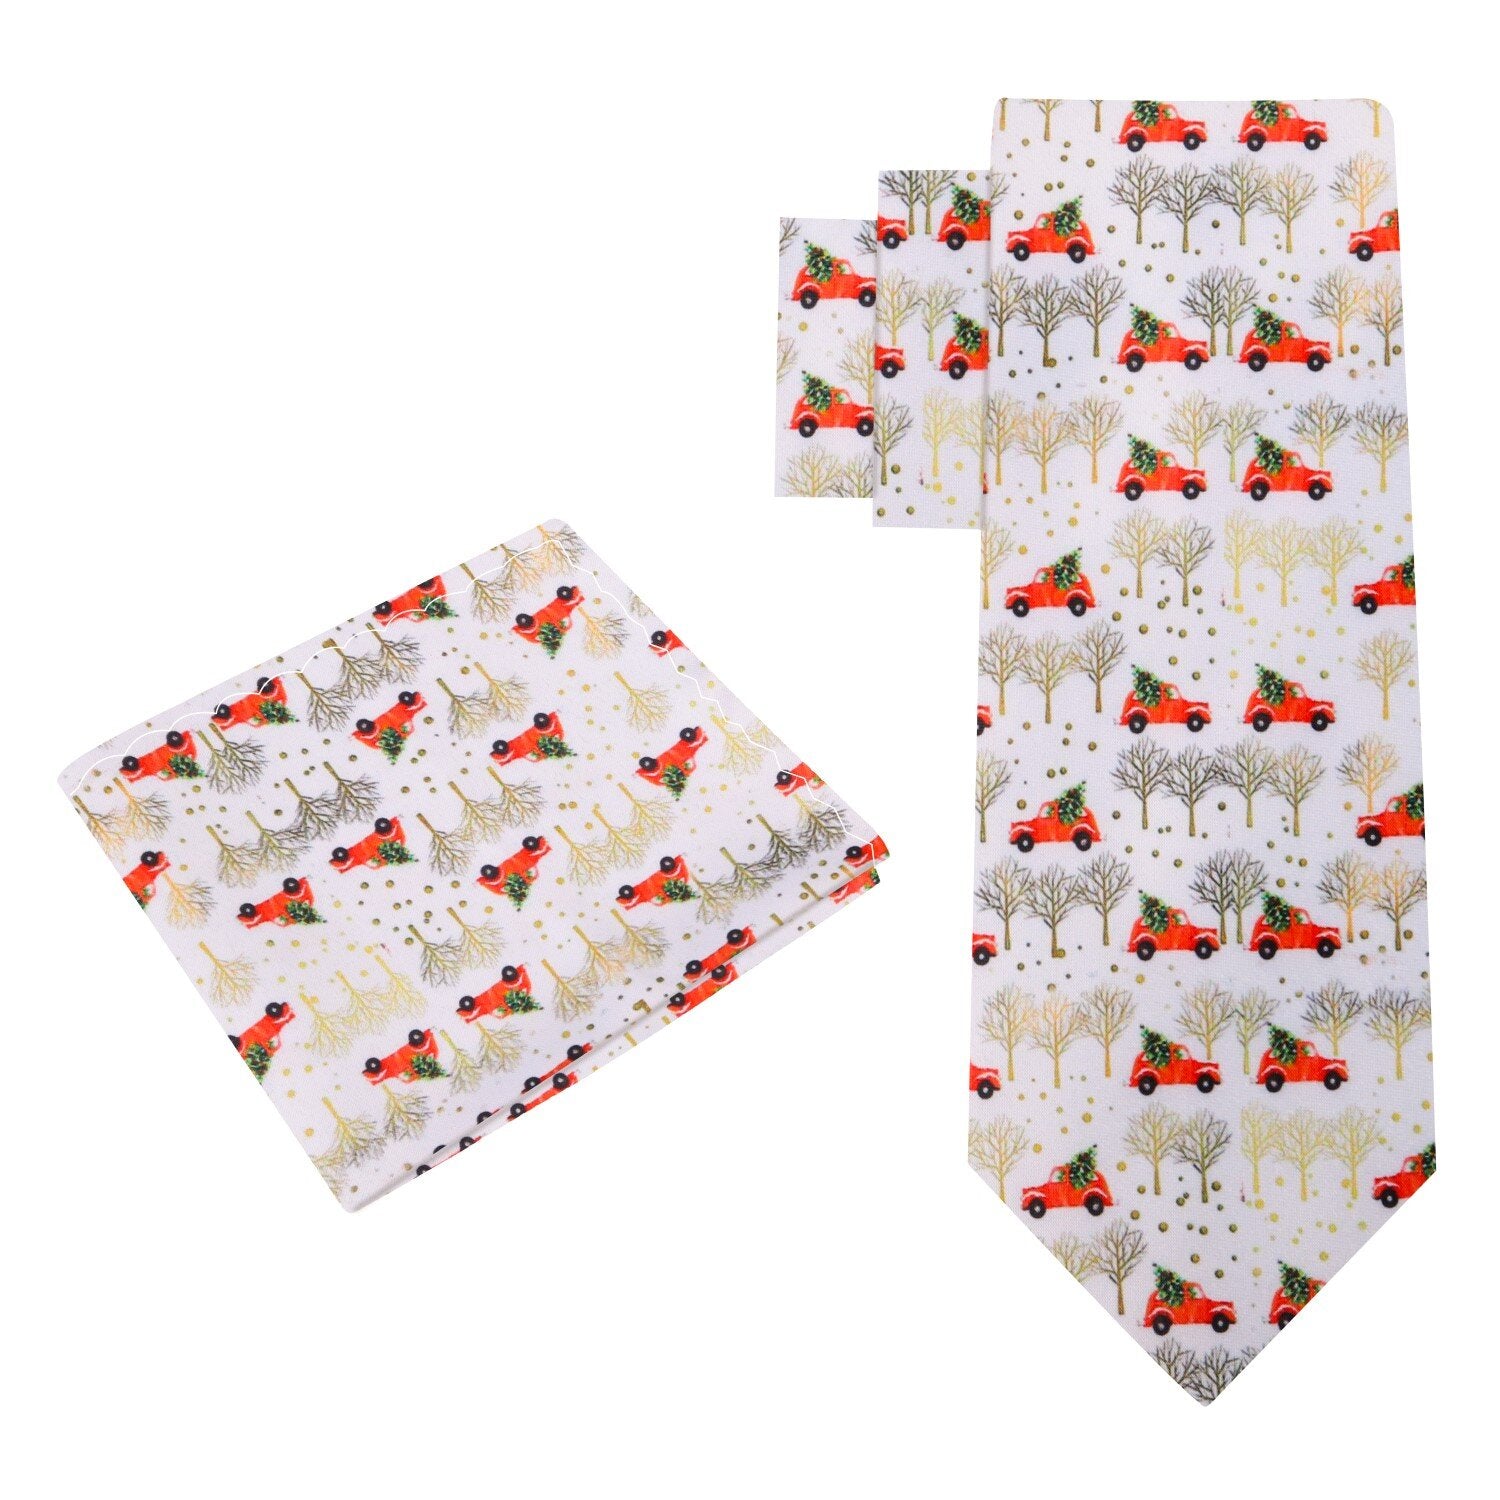 Alt View: White, Red, Green, Gold Car Carrying Christmas Tree Tie And Pocket Square